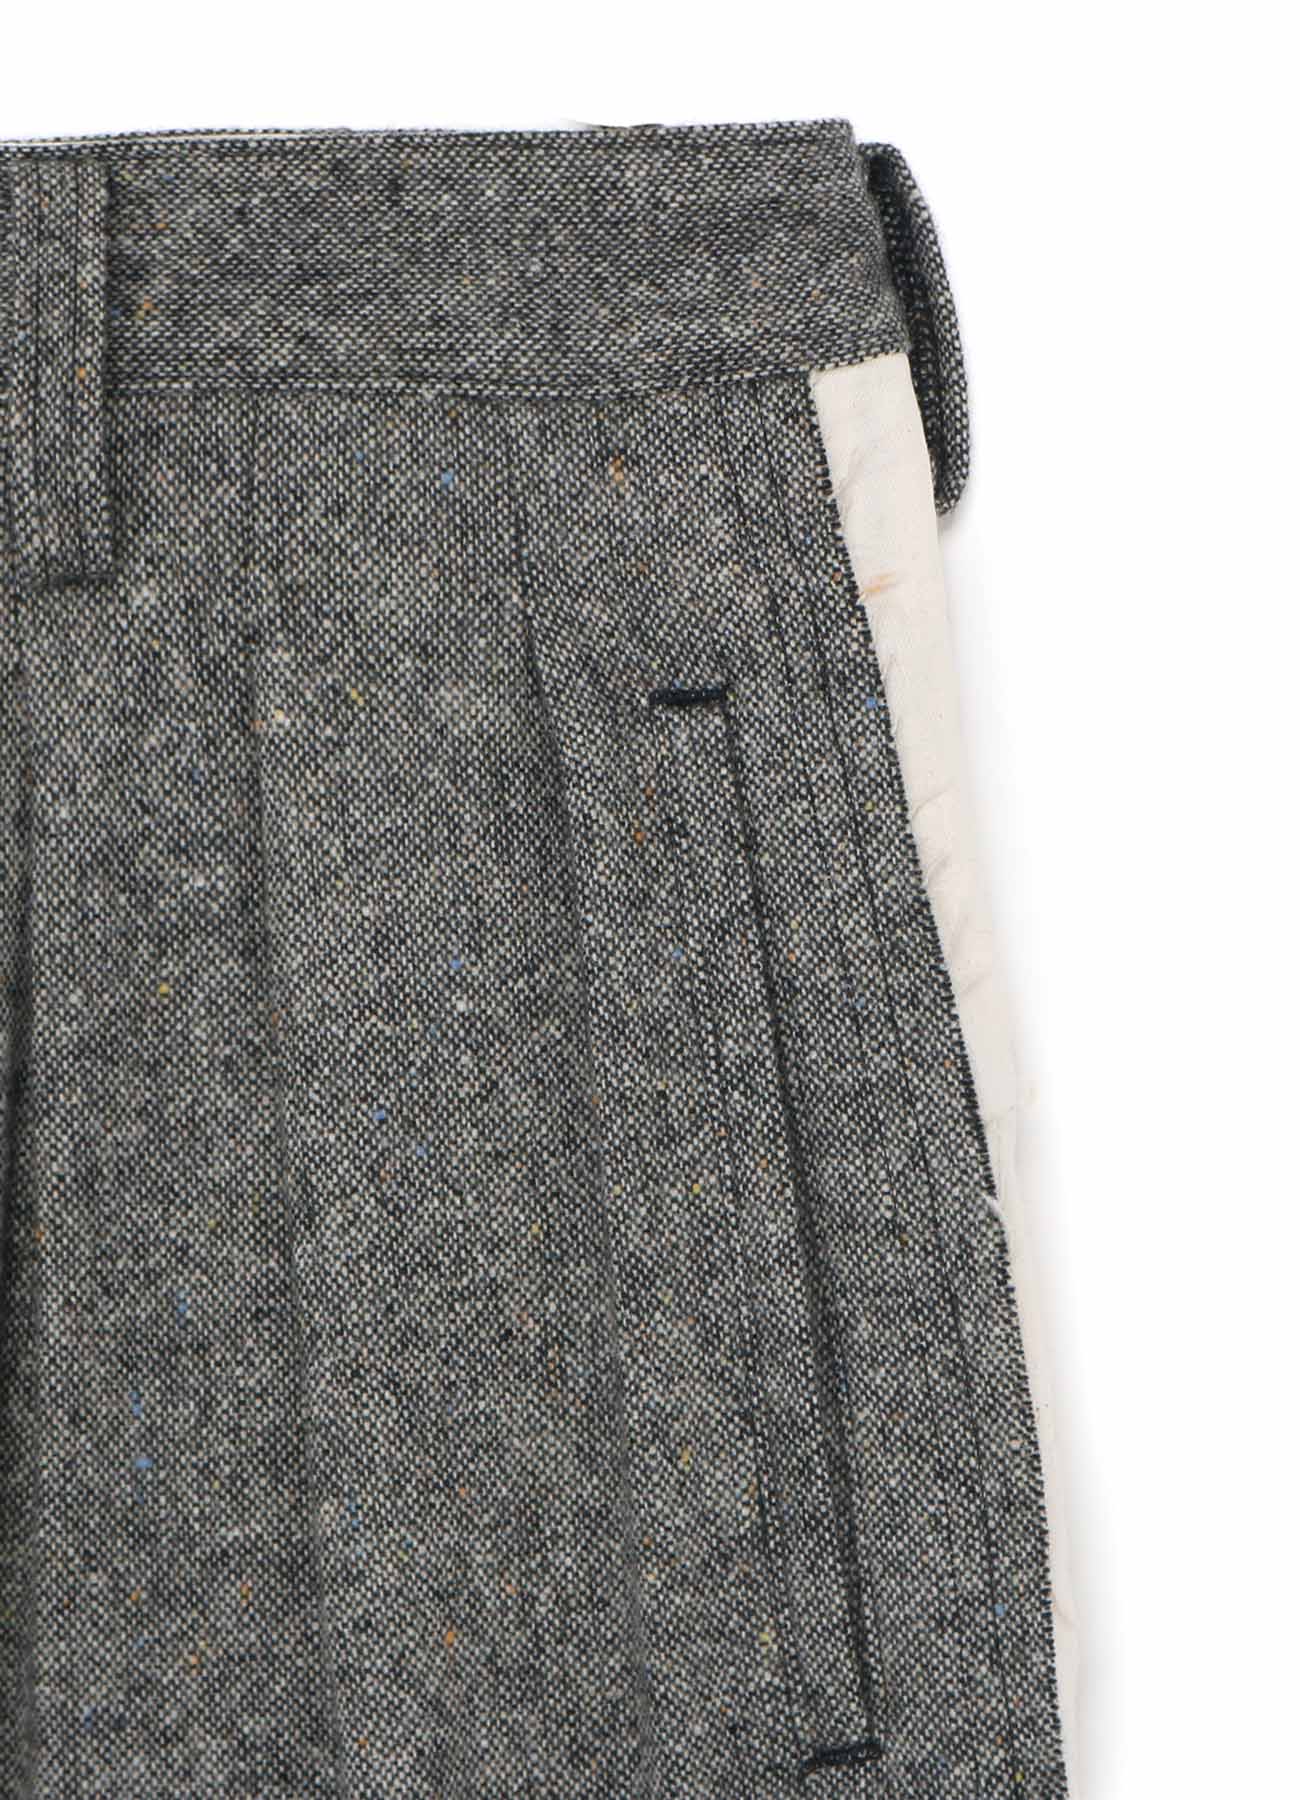 Etermine Nep Tweed+Cotton Twill Side Switching Pants